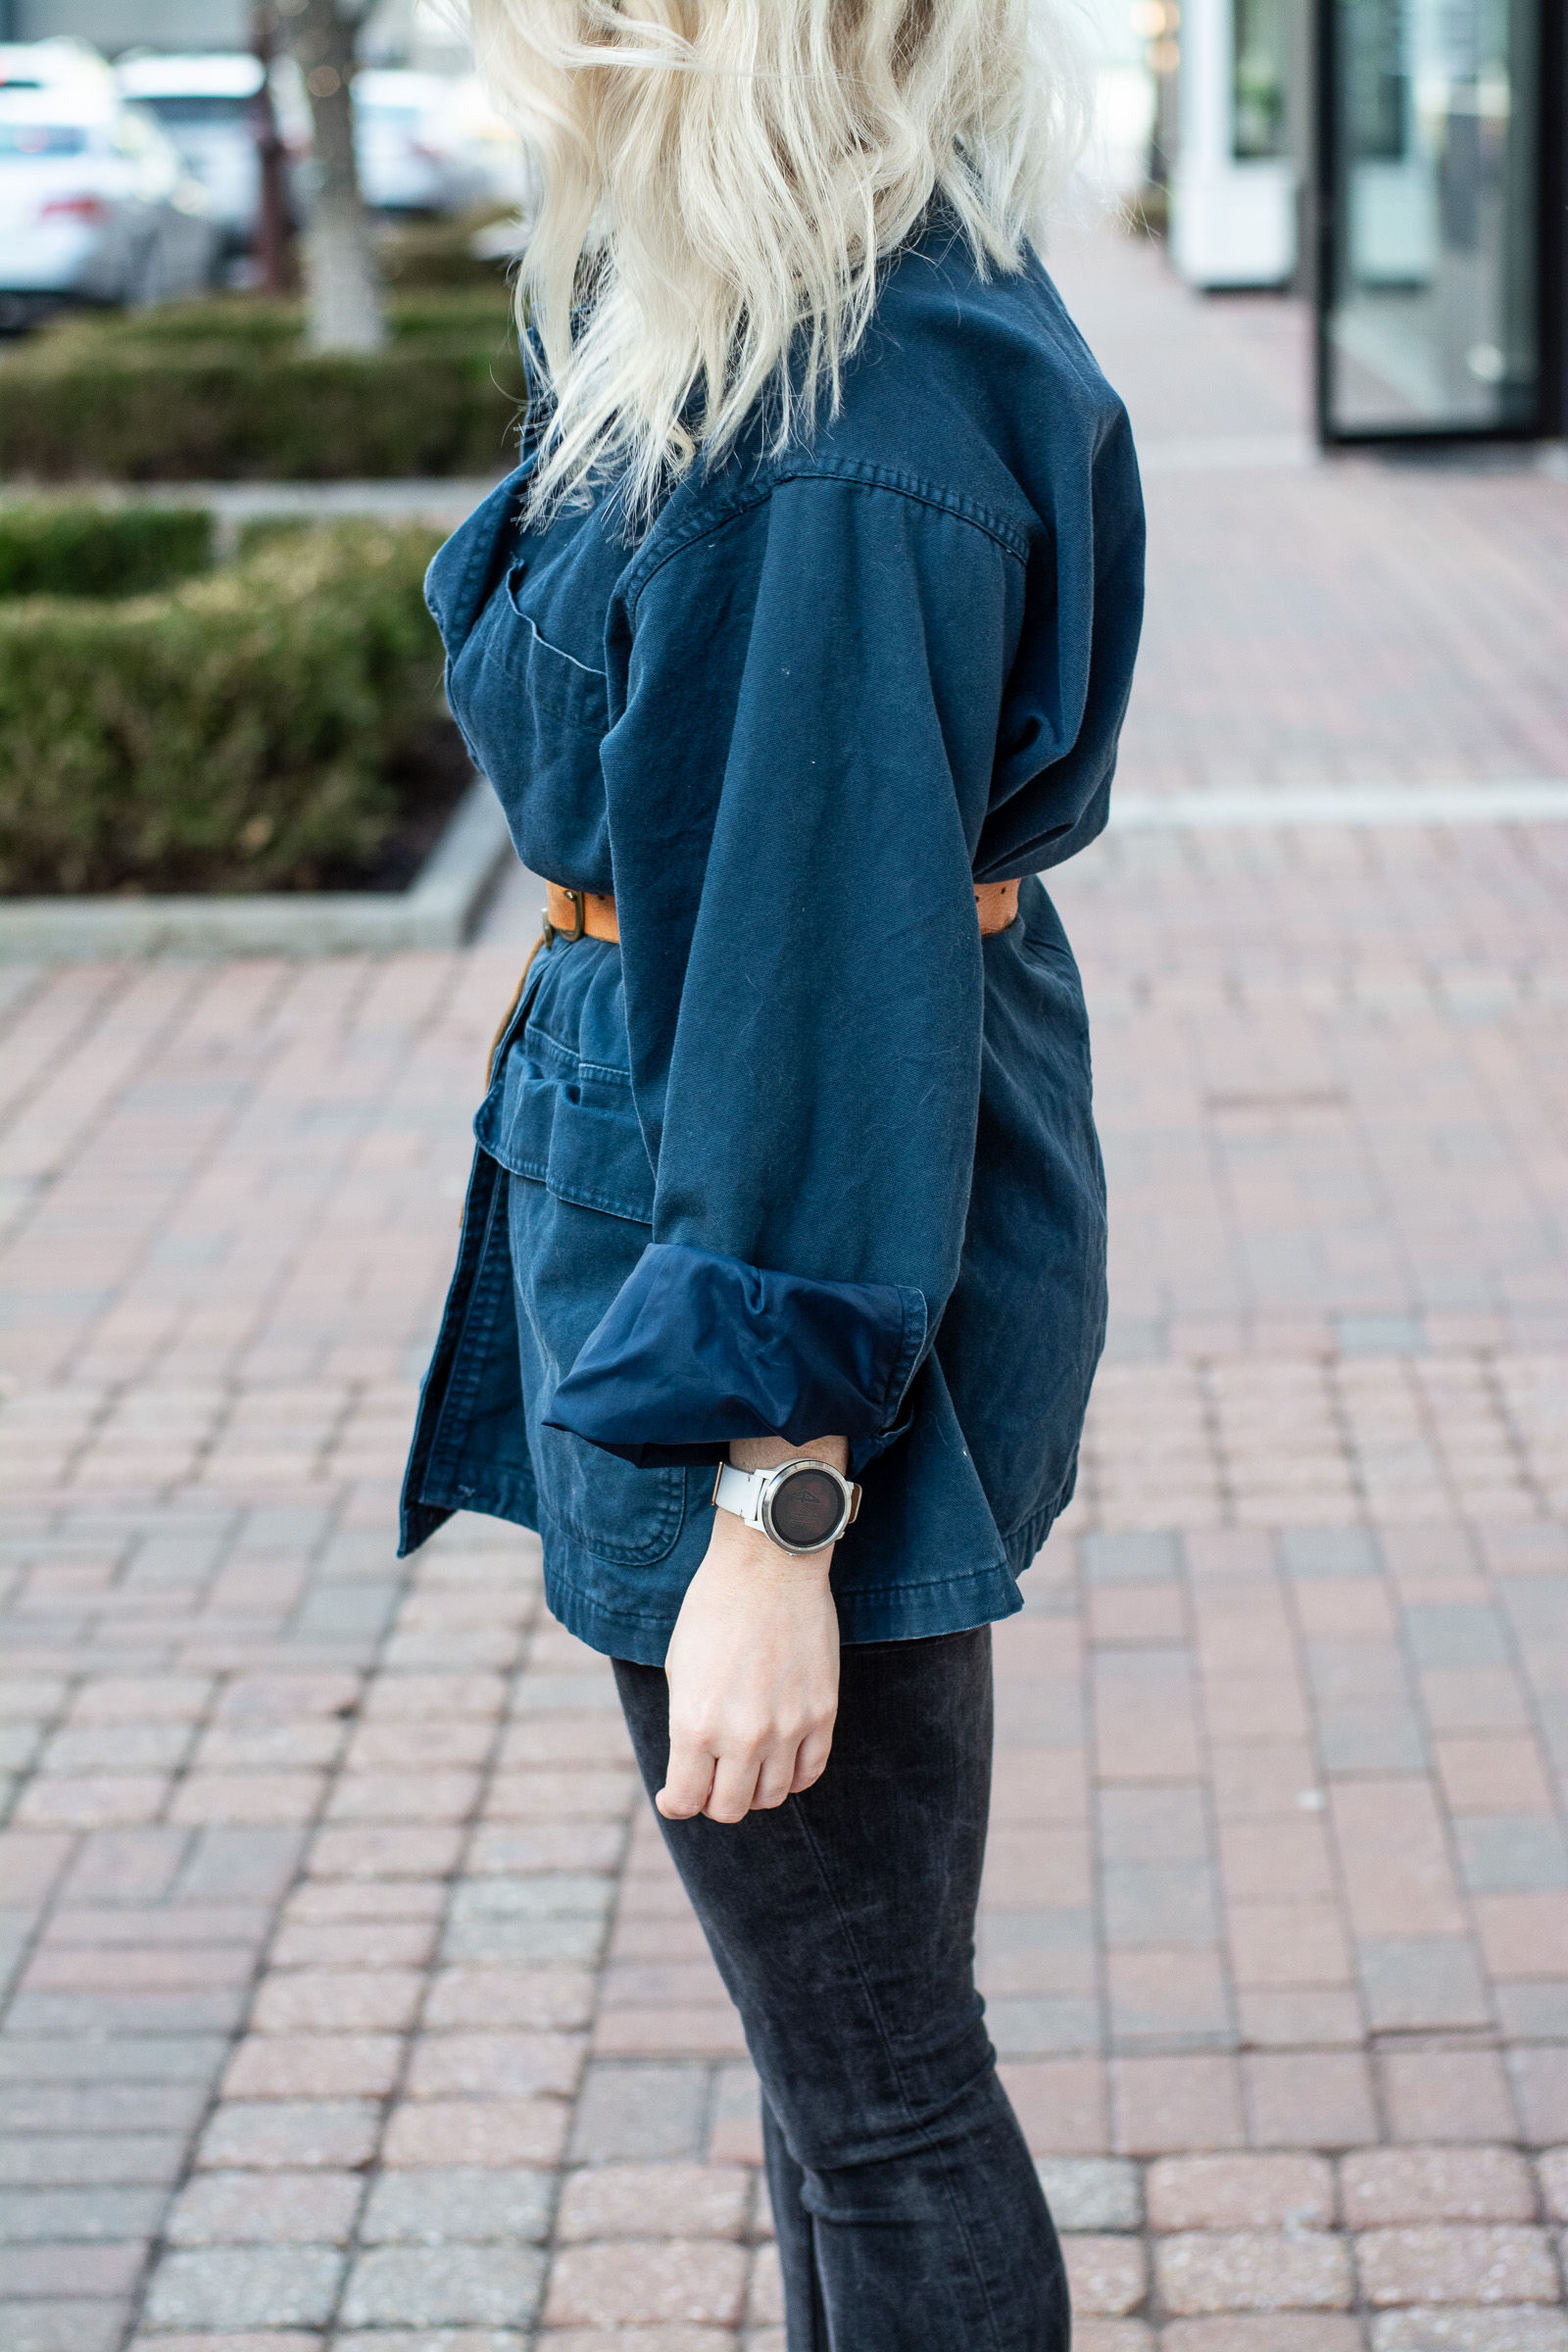 Test-driving a Vintage Farm Coat. | Ash from LSR